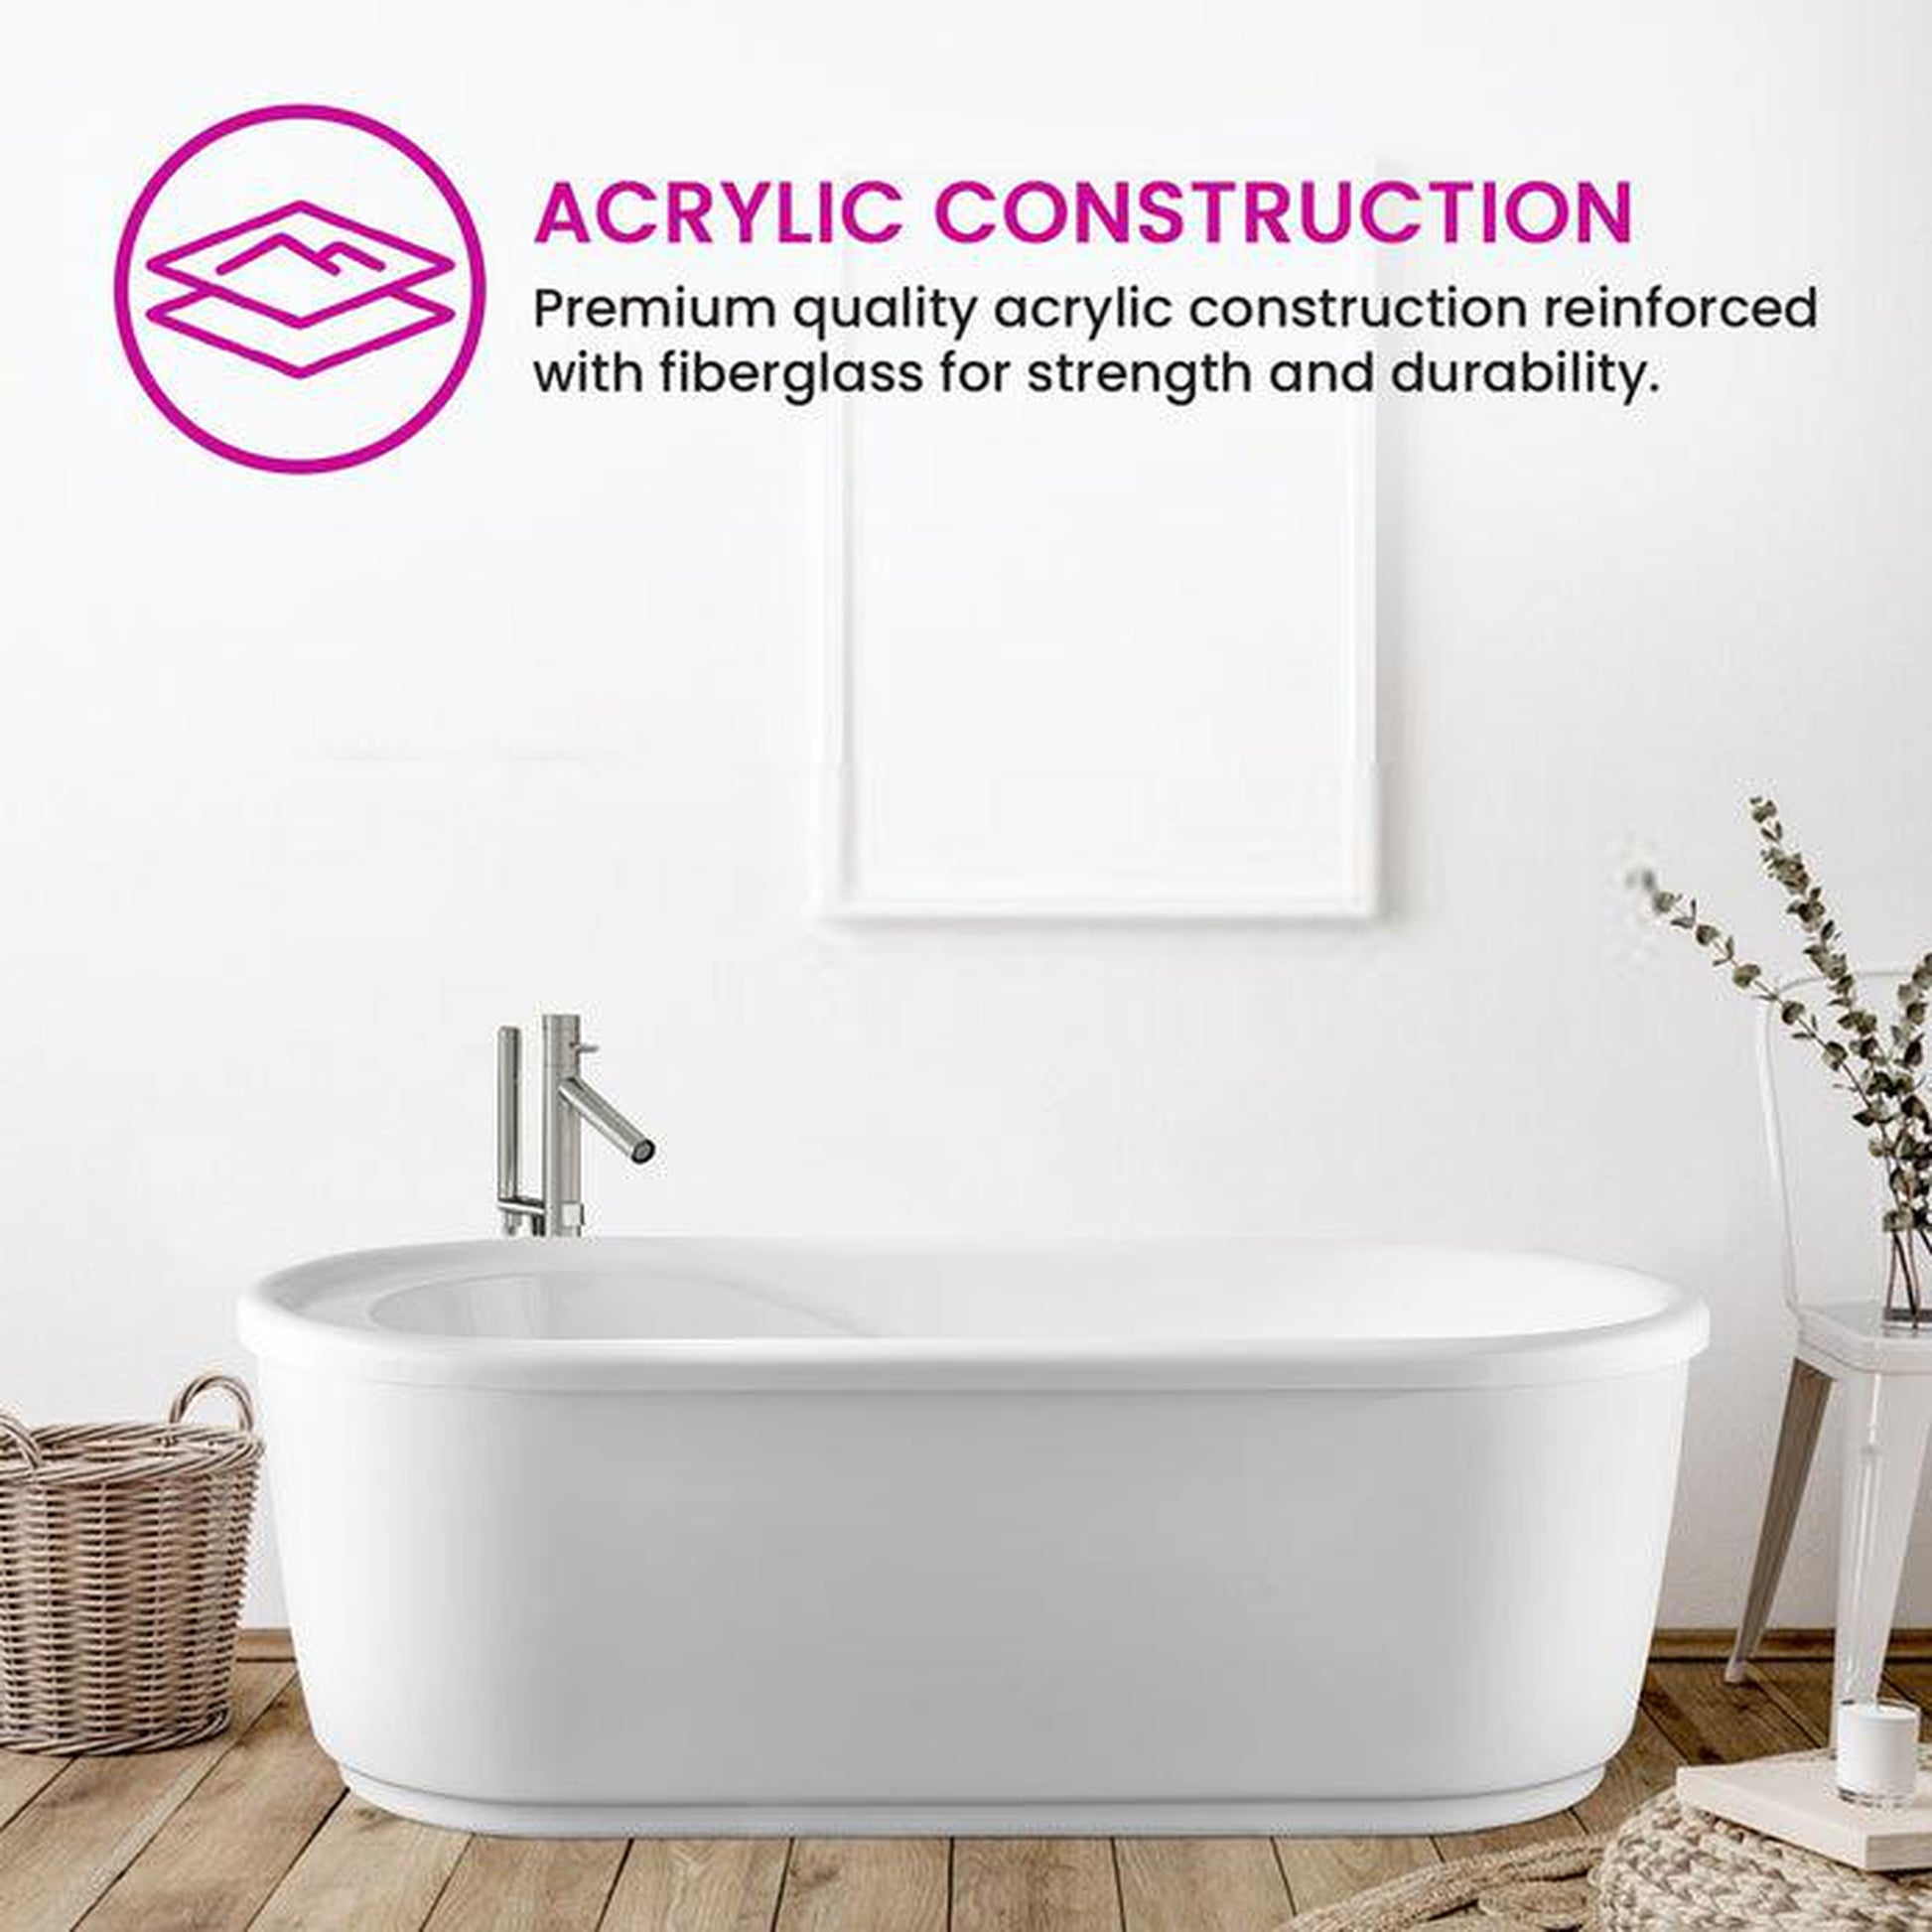 Vanity Art 67" W x 23" H White Acrylic Freestanding Bathtub With Polished Chrome Round Overflow and Pop-up Drain